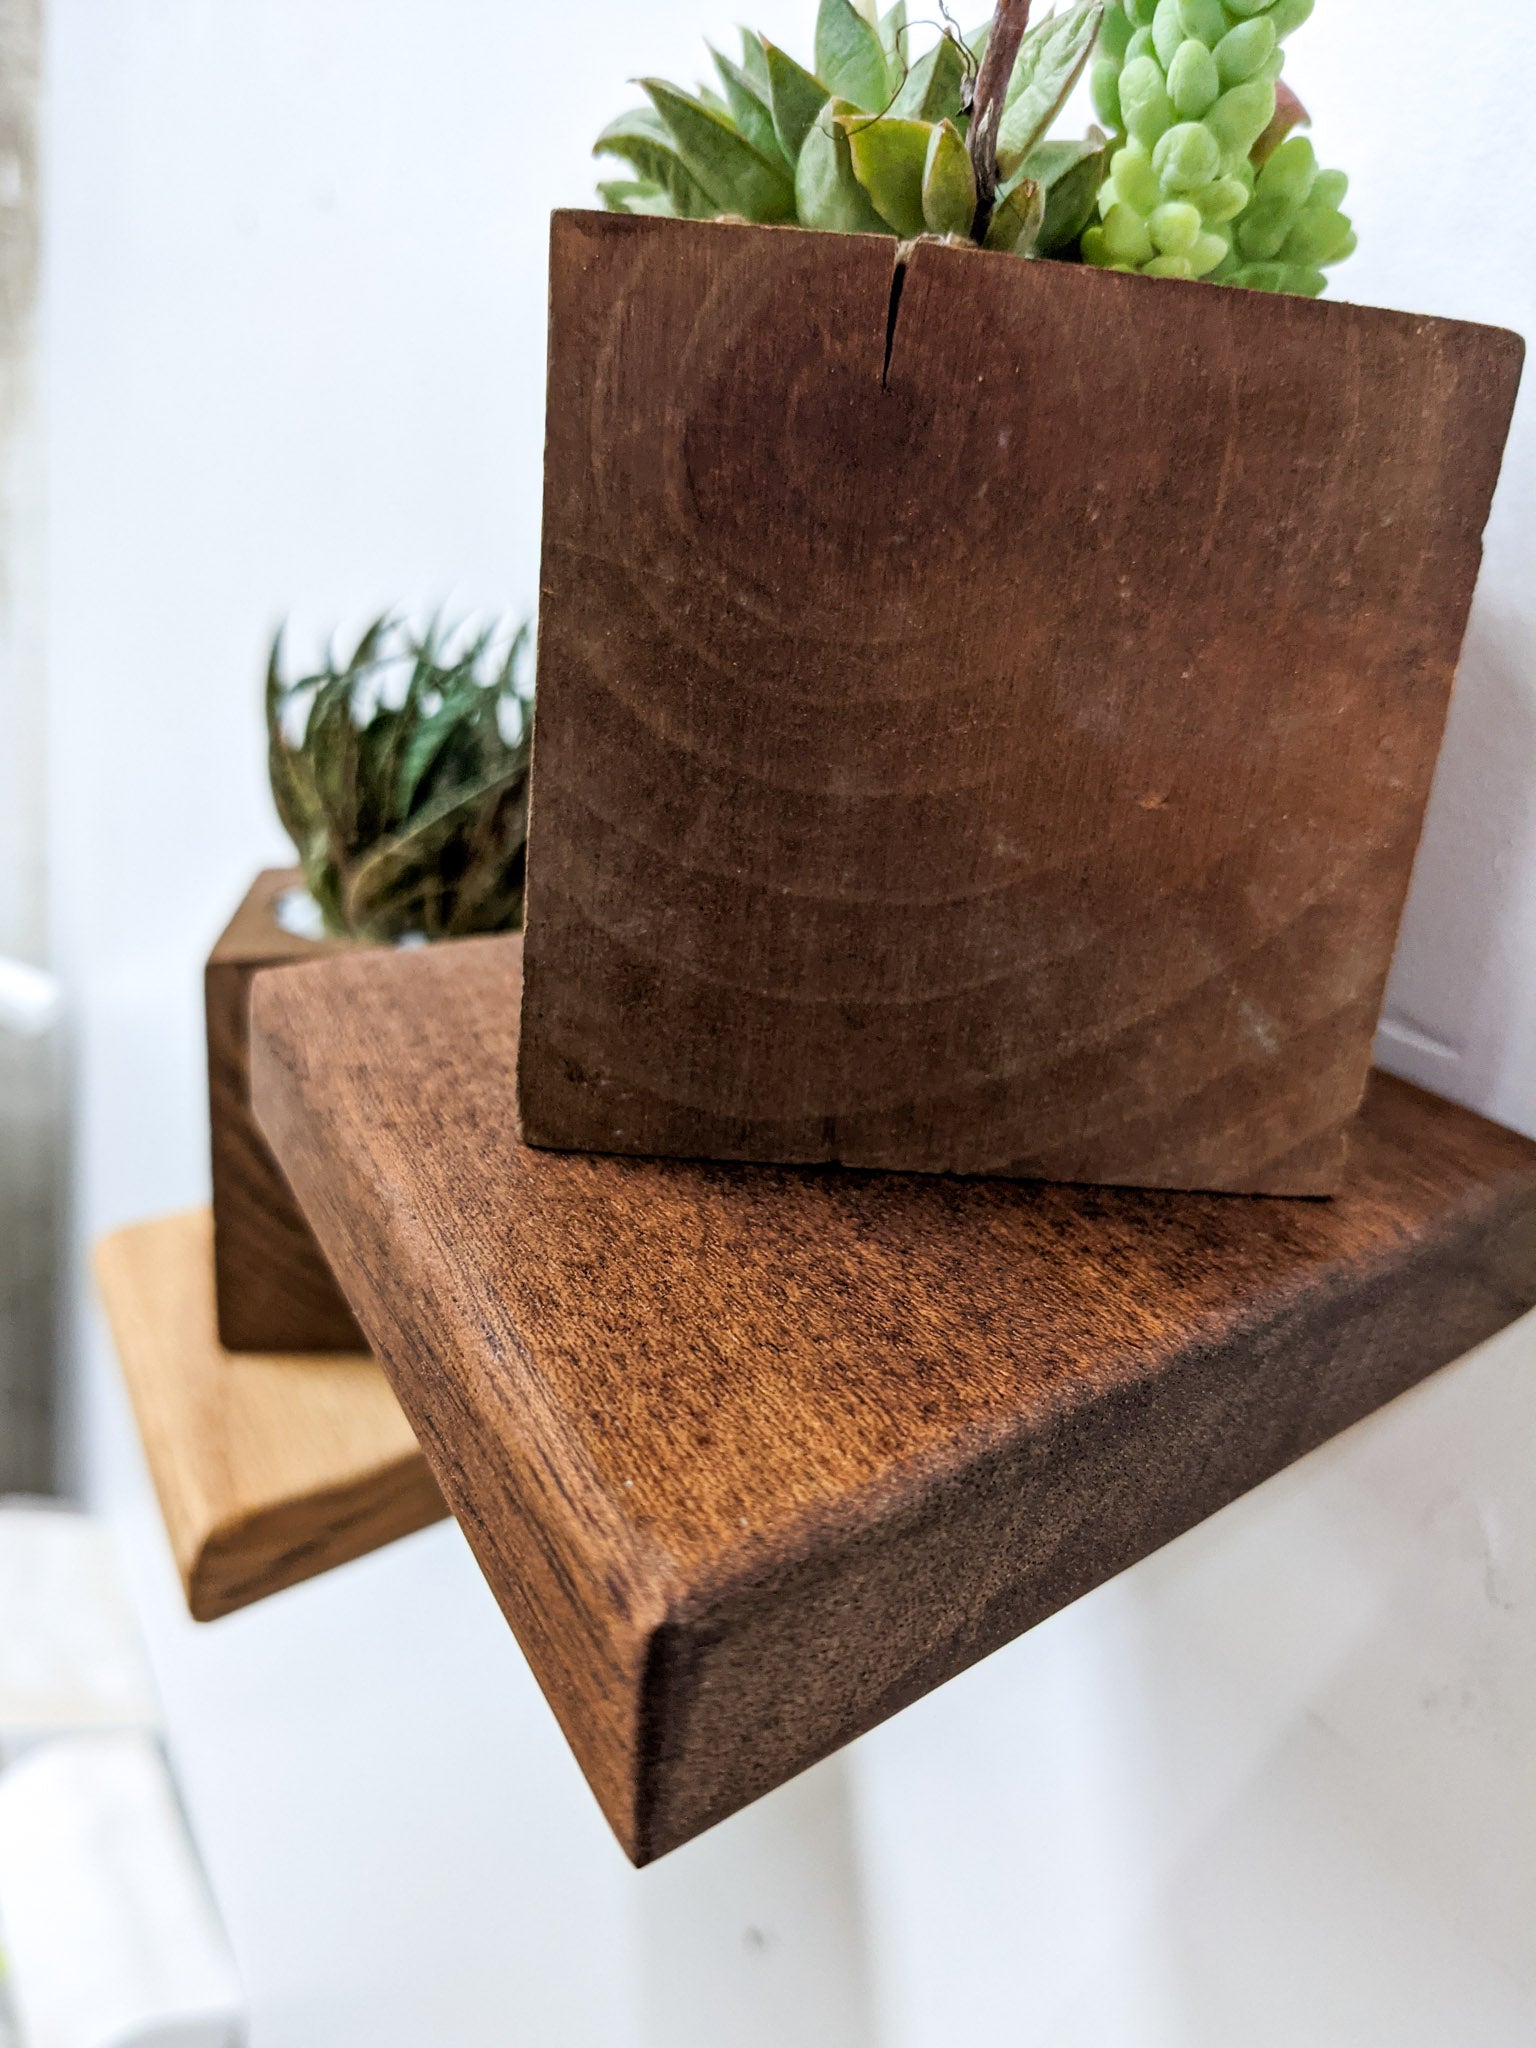 A close up side view of the small mahogany rhombus floating shelf. The reddish brown grain of the wood is highlighted along with the soft bevelled edges. On top a mahogany square planter sits and is filled with succulents. 